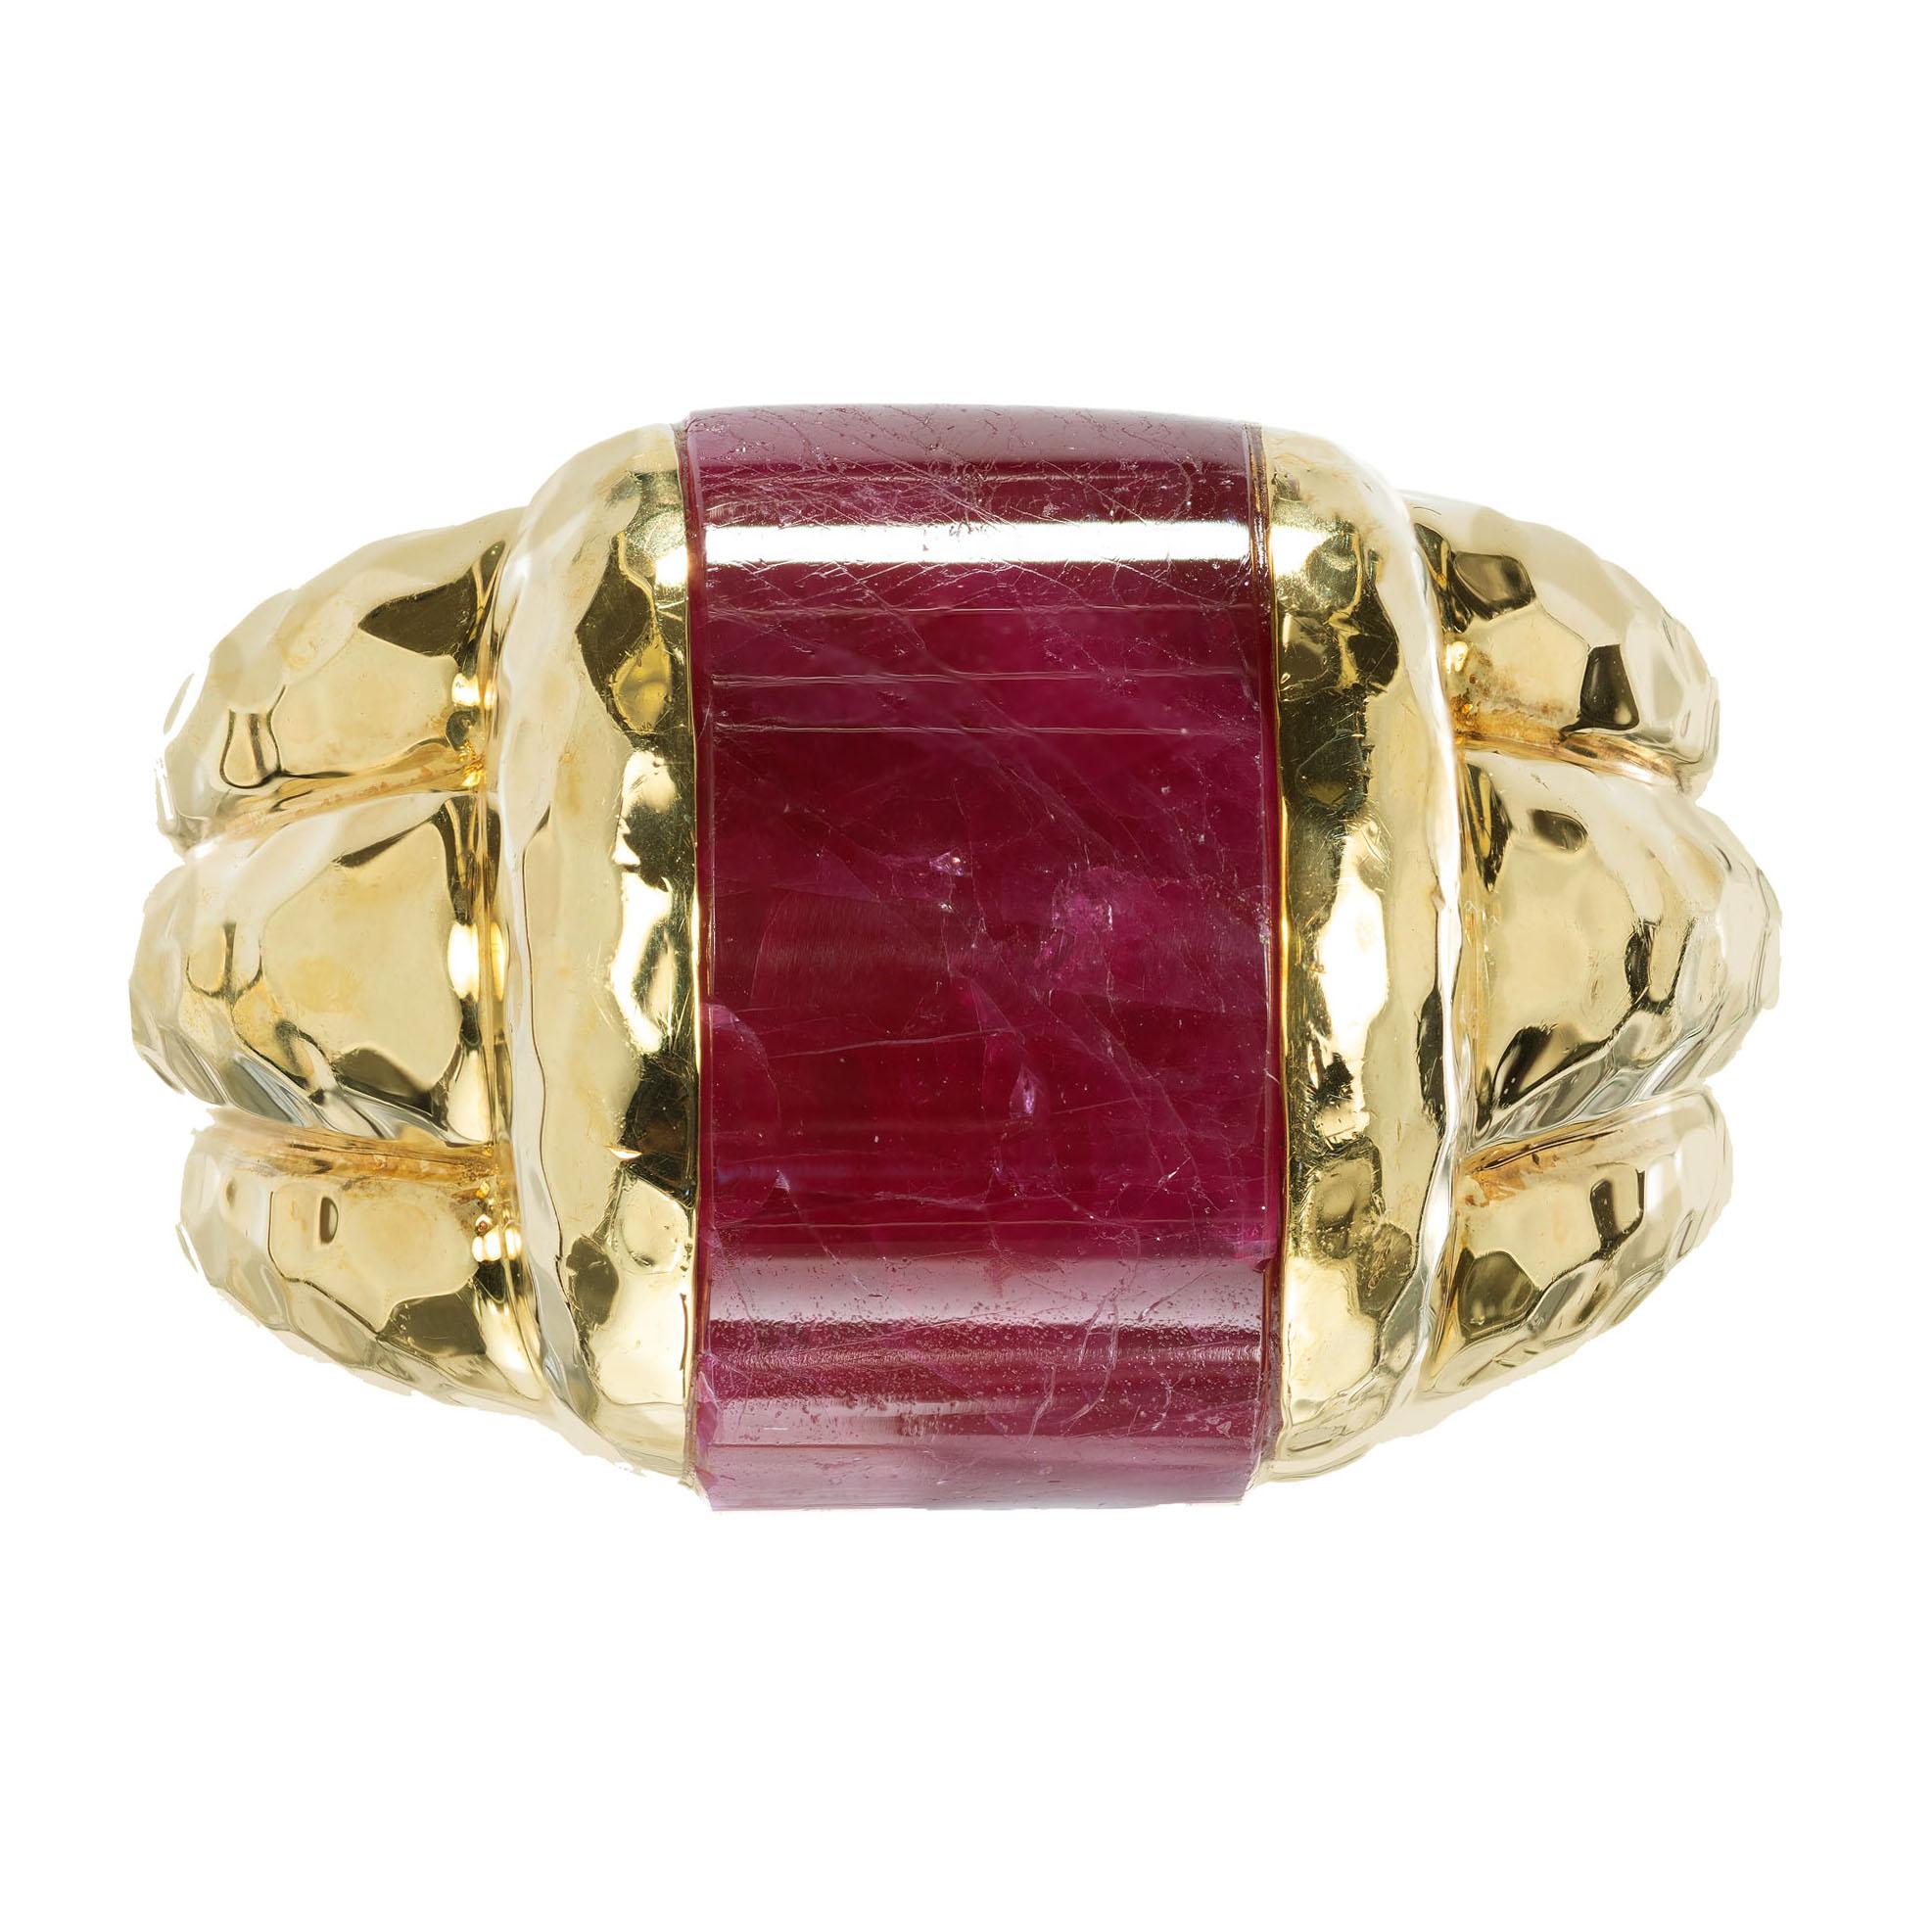 Henry Dunay ruby hammered cocktail ring. Crescent shaped certified Half Cylinder fitted Ruby center approx. 7.0cts. GIA Natural Ruby. No heat, No Enhancements.  Moderate inclusions. 

Ruby crescent center,  approx. 7.0ct. GIA certificate #